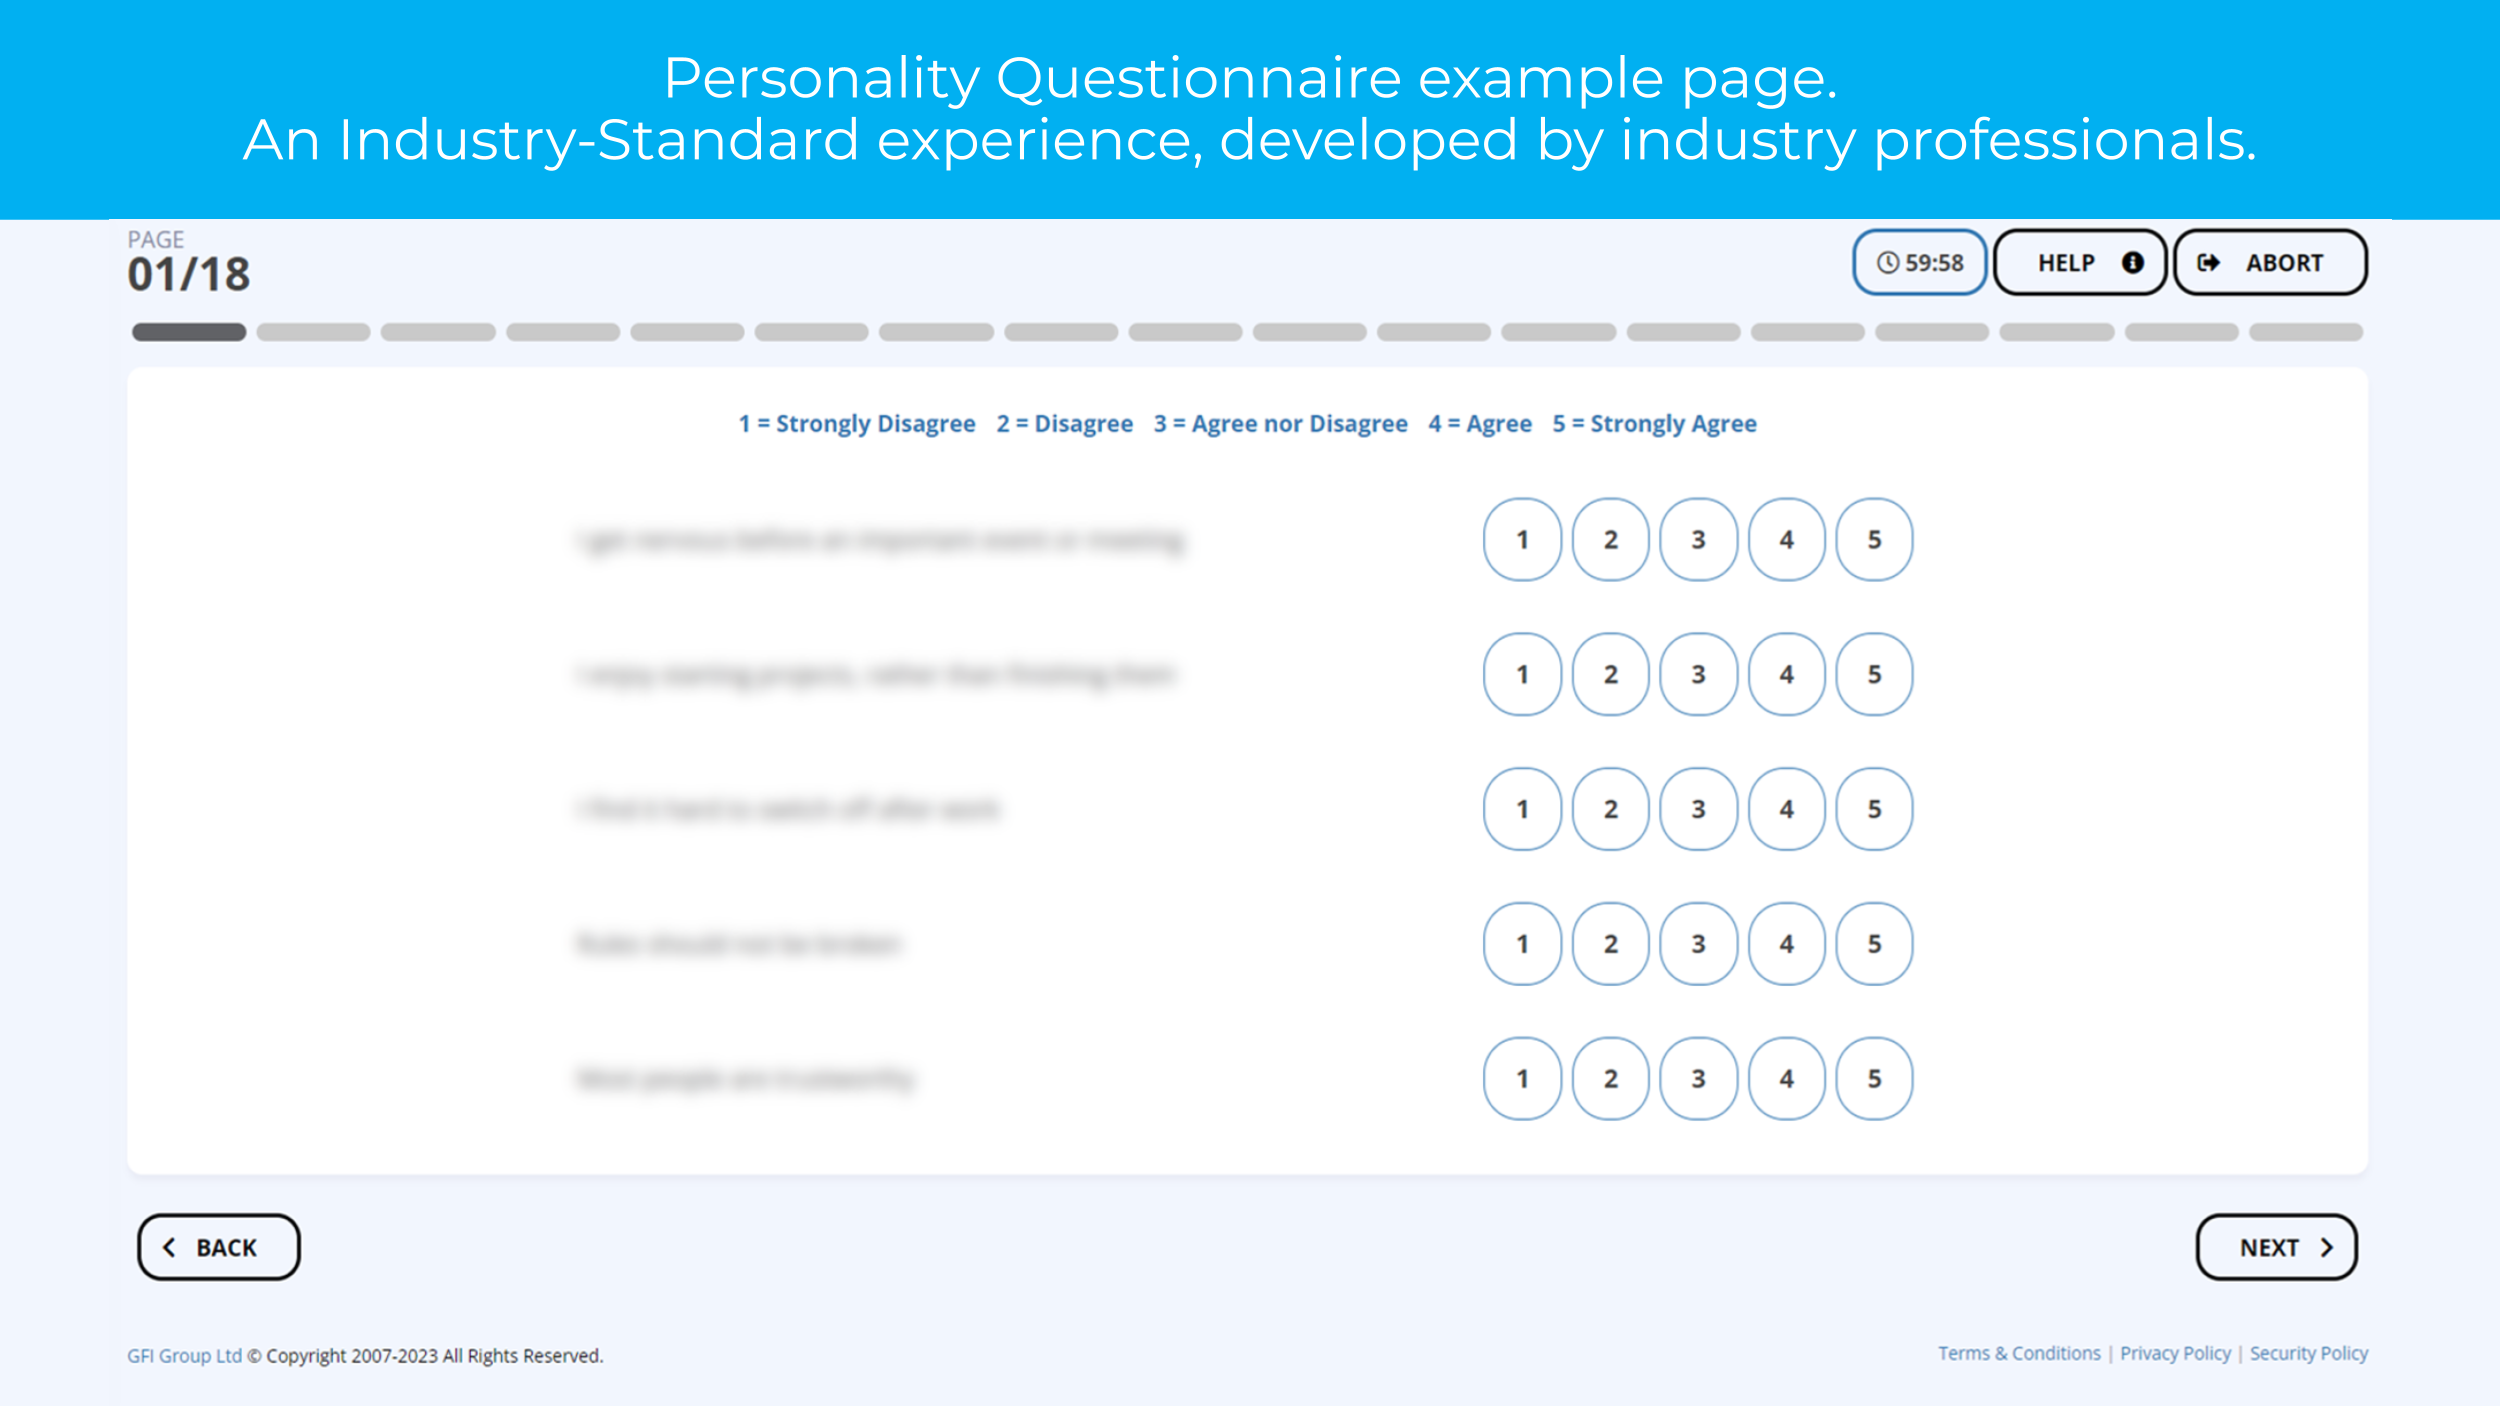 Korn Ferry personality questionnaire